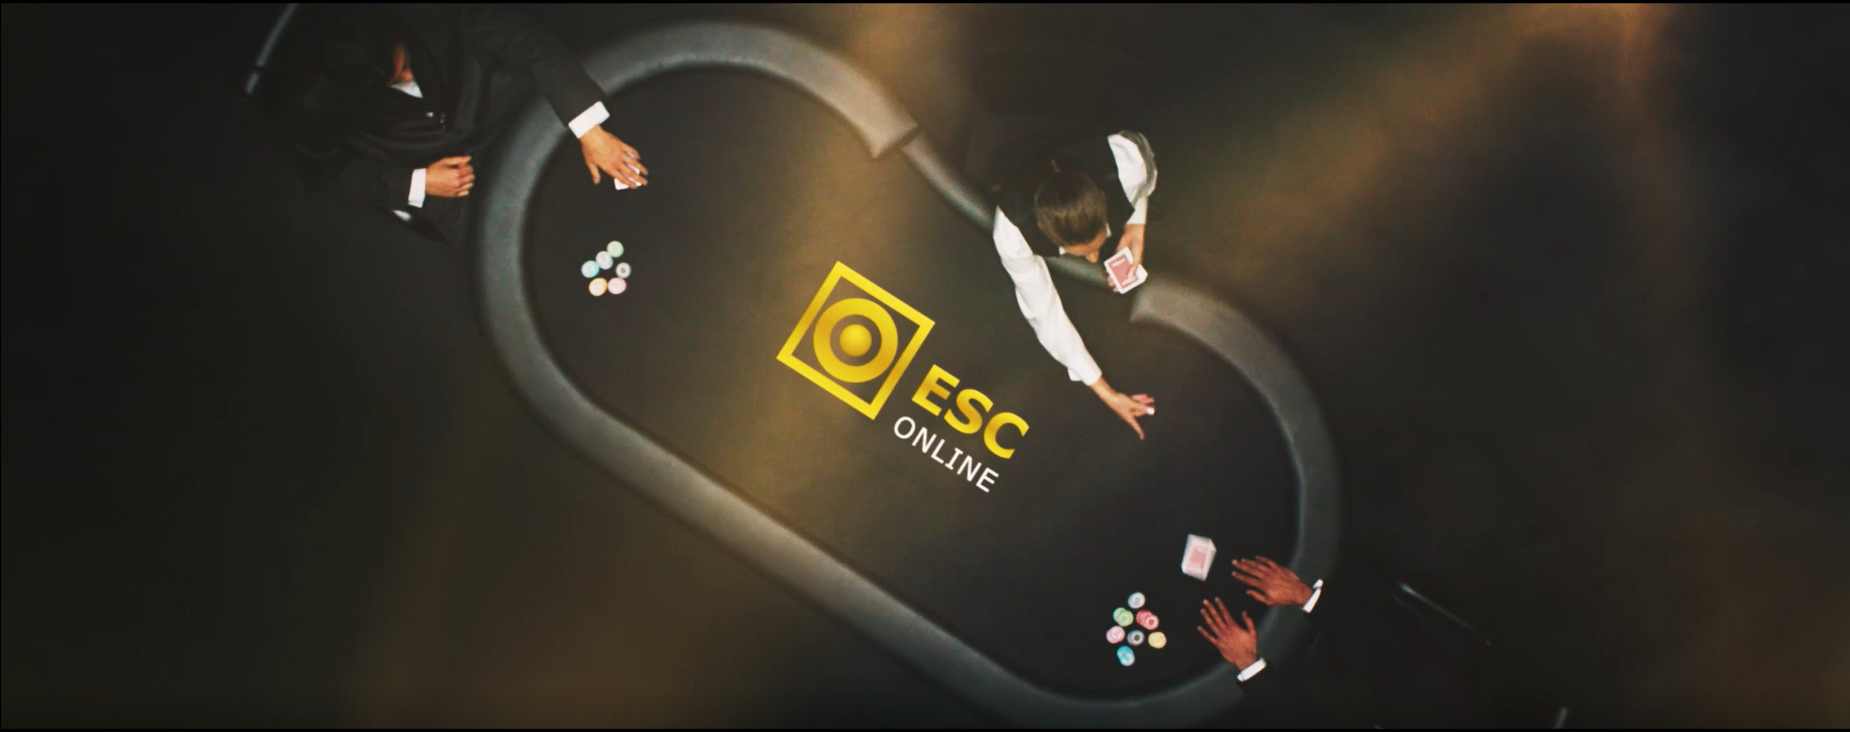 GAMING1 launches landmark Poker deal with ESC Online and AconcaguaPoker